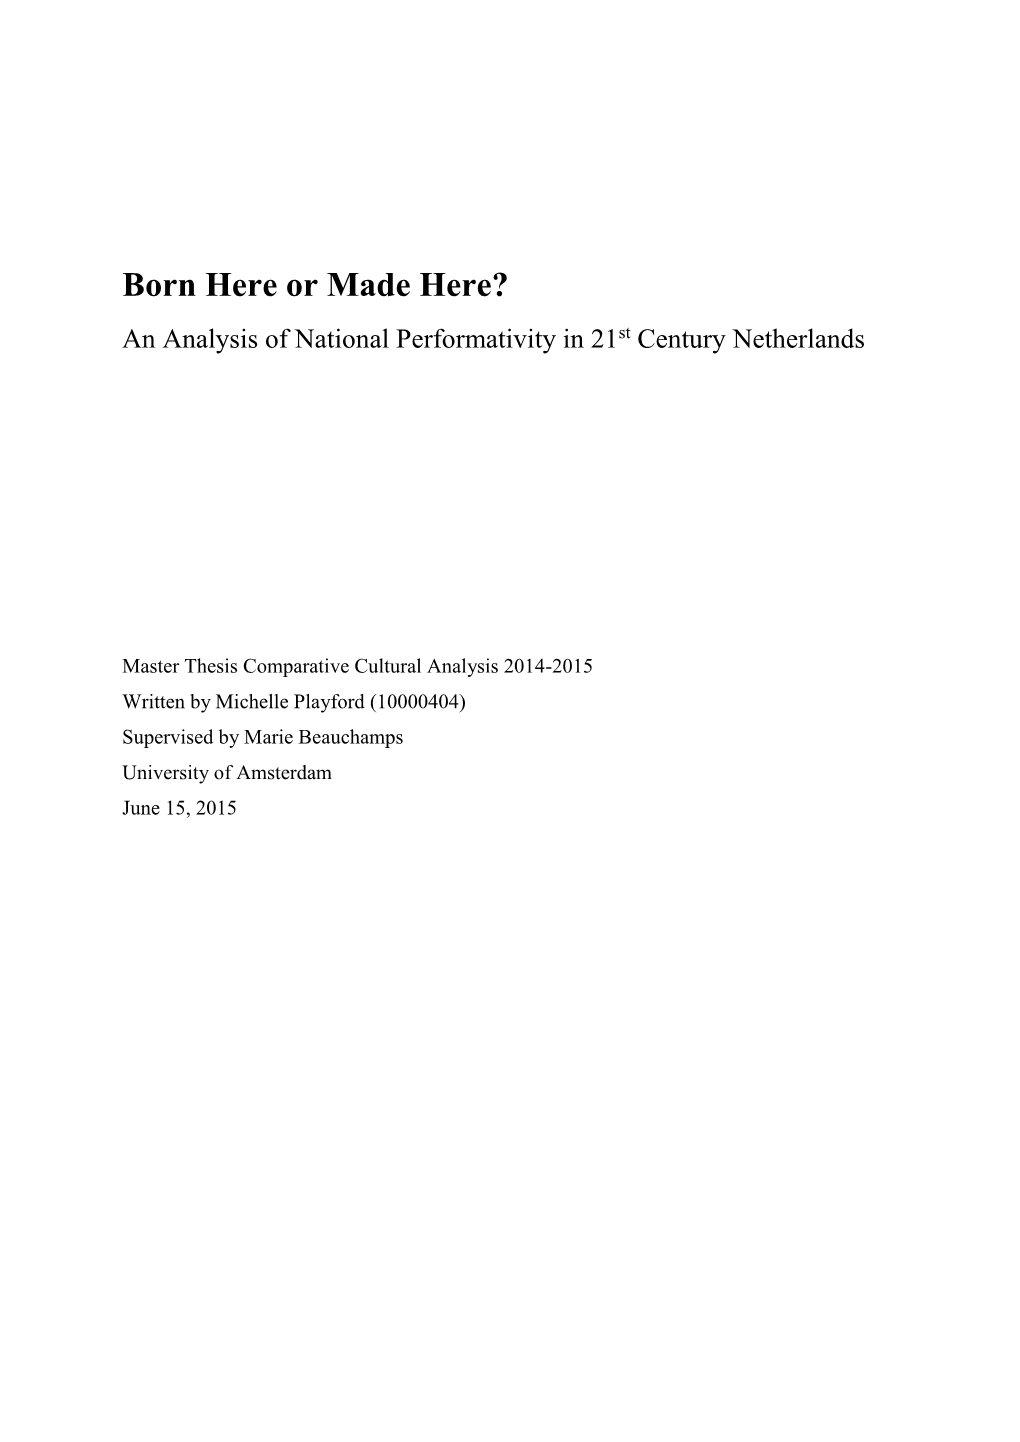 Born Here Or Made Here? an Analysis of National Performativity in 21St Century Netherlands